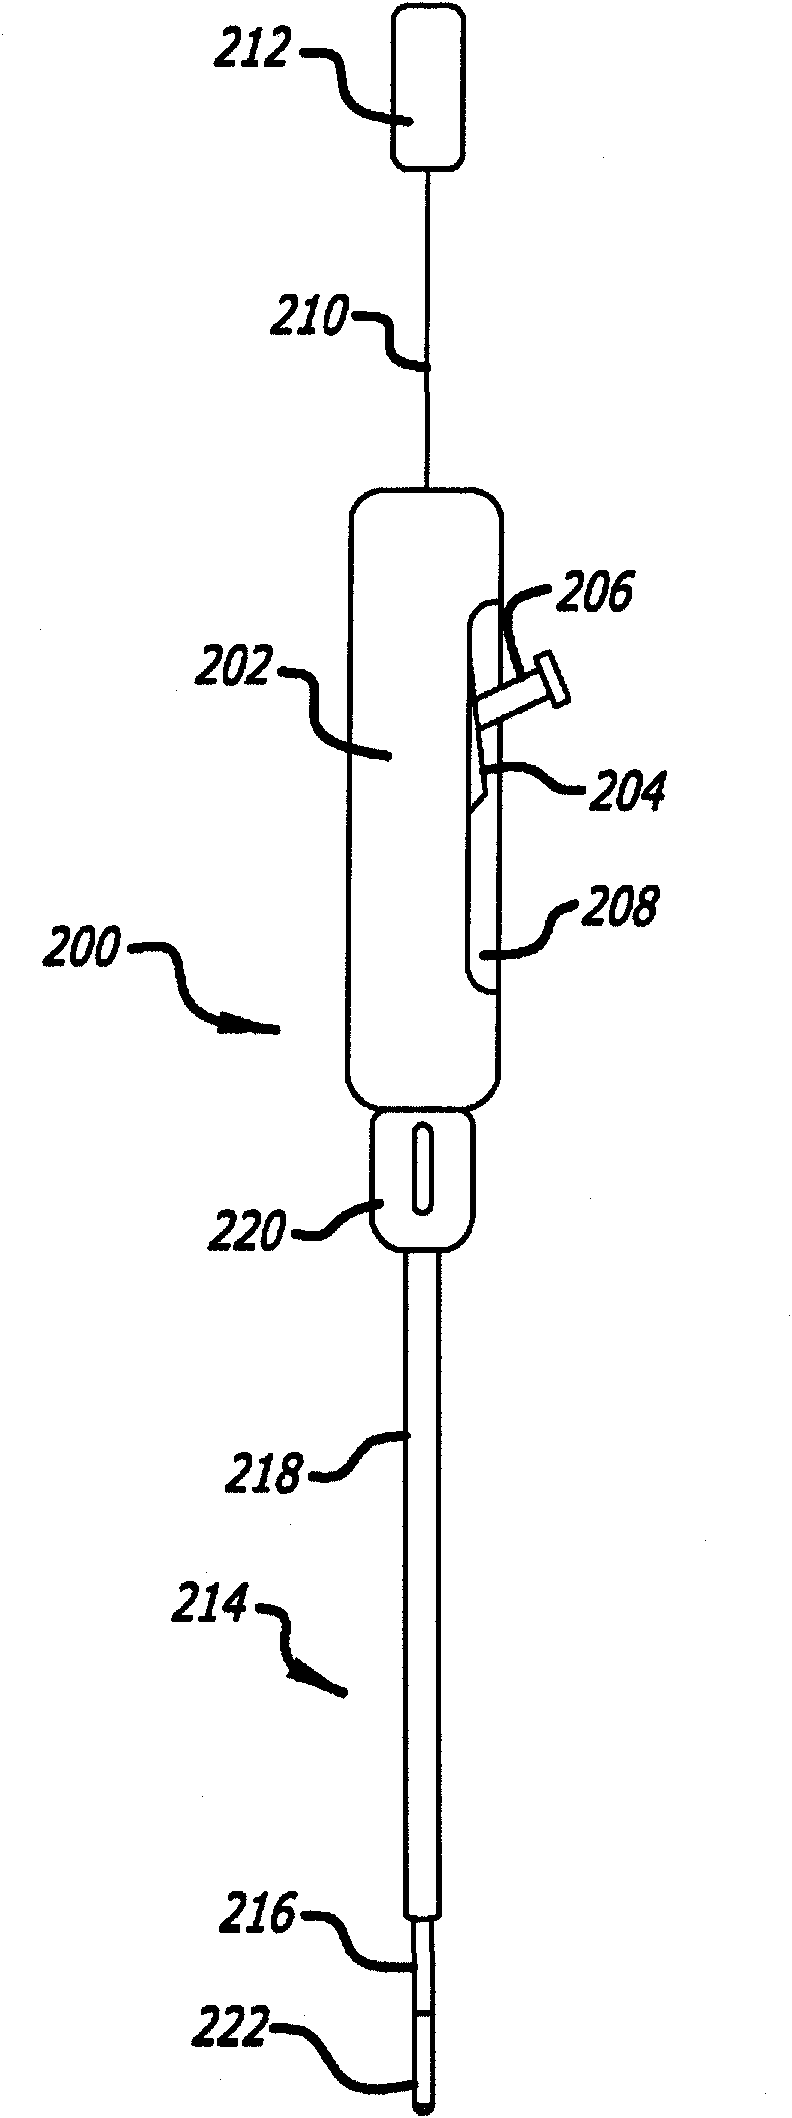 Methods and apparatus for treating disorders of ear nose and throat